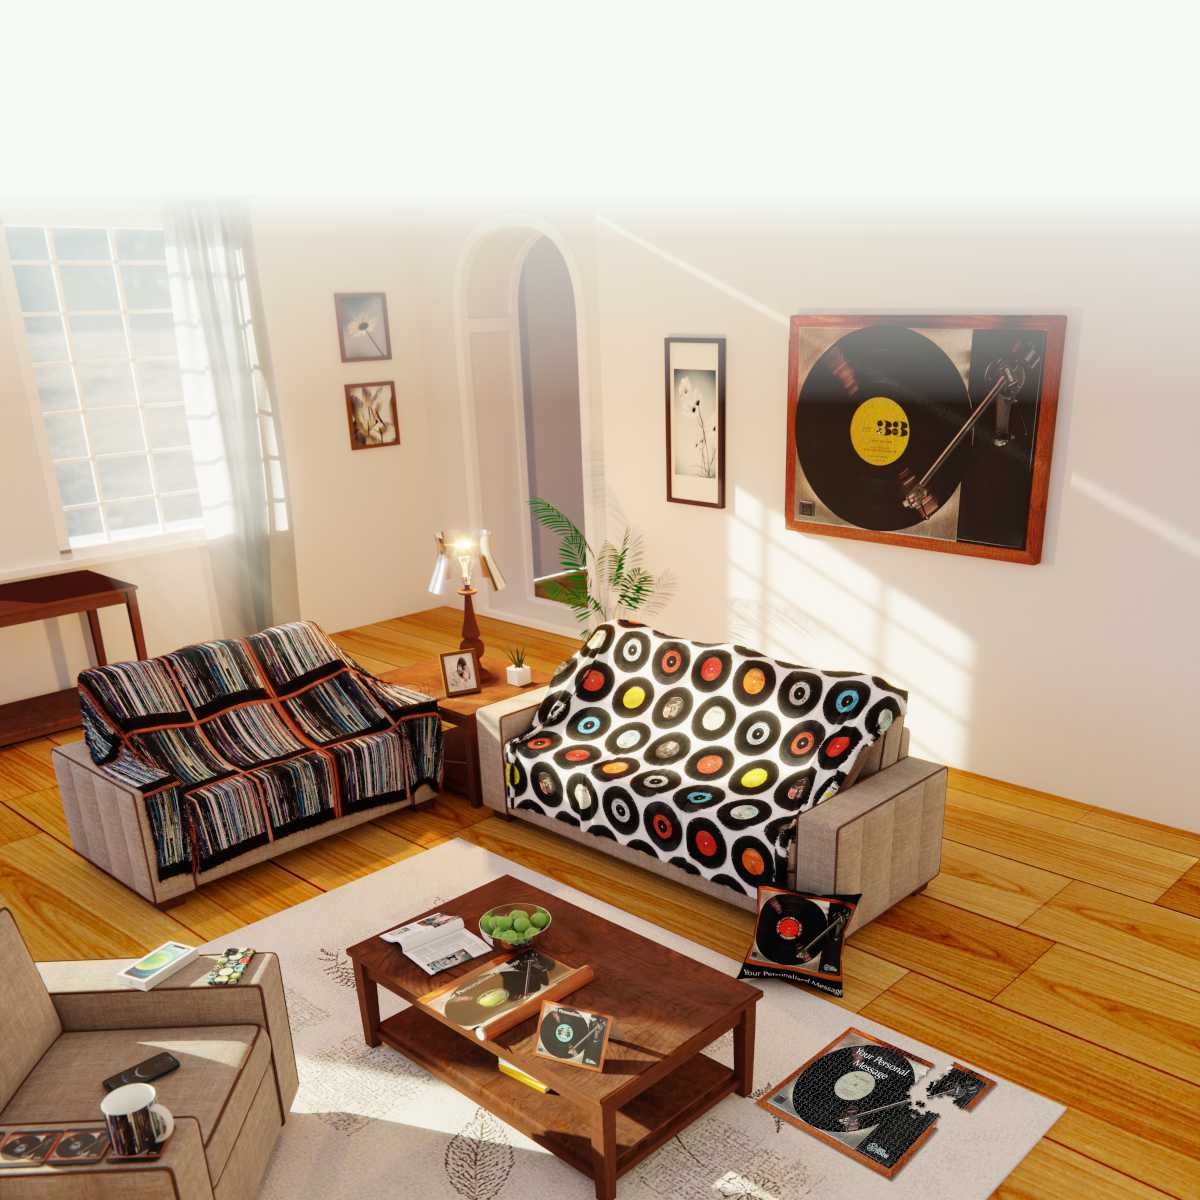 An image of a room full of homeware items, such as blankets and cushions, the items having music and vinyl record themed images on them